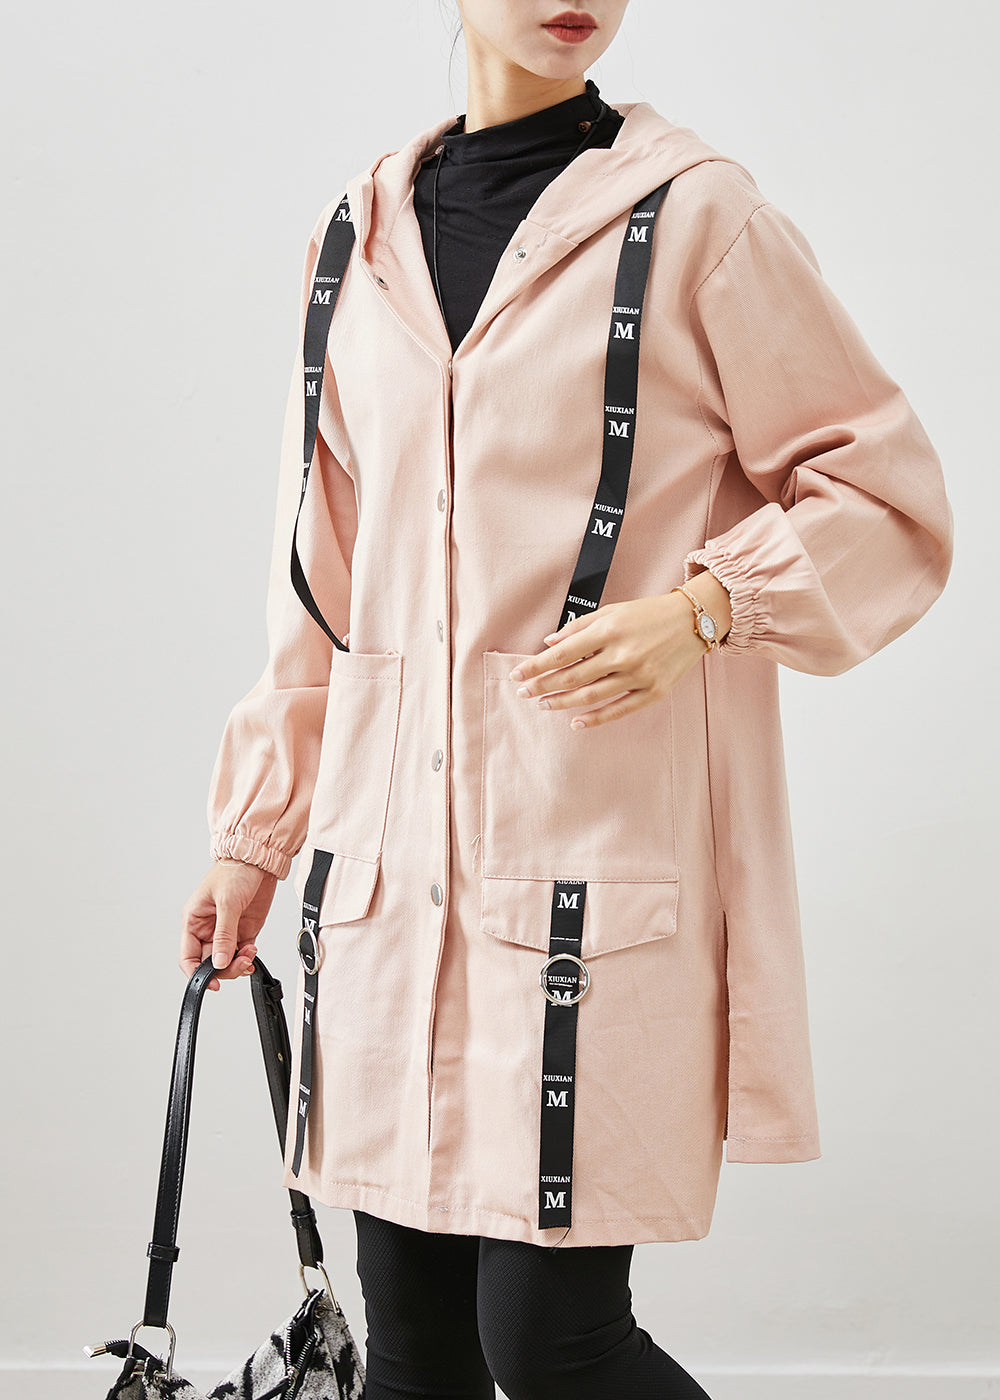 Simple Pink Oversized Patchwork Cotton Hooded Coat Fall